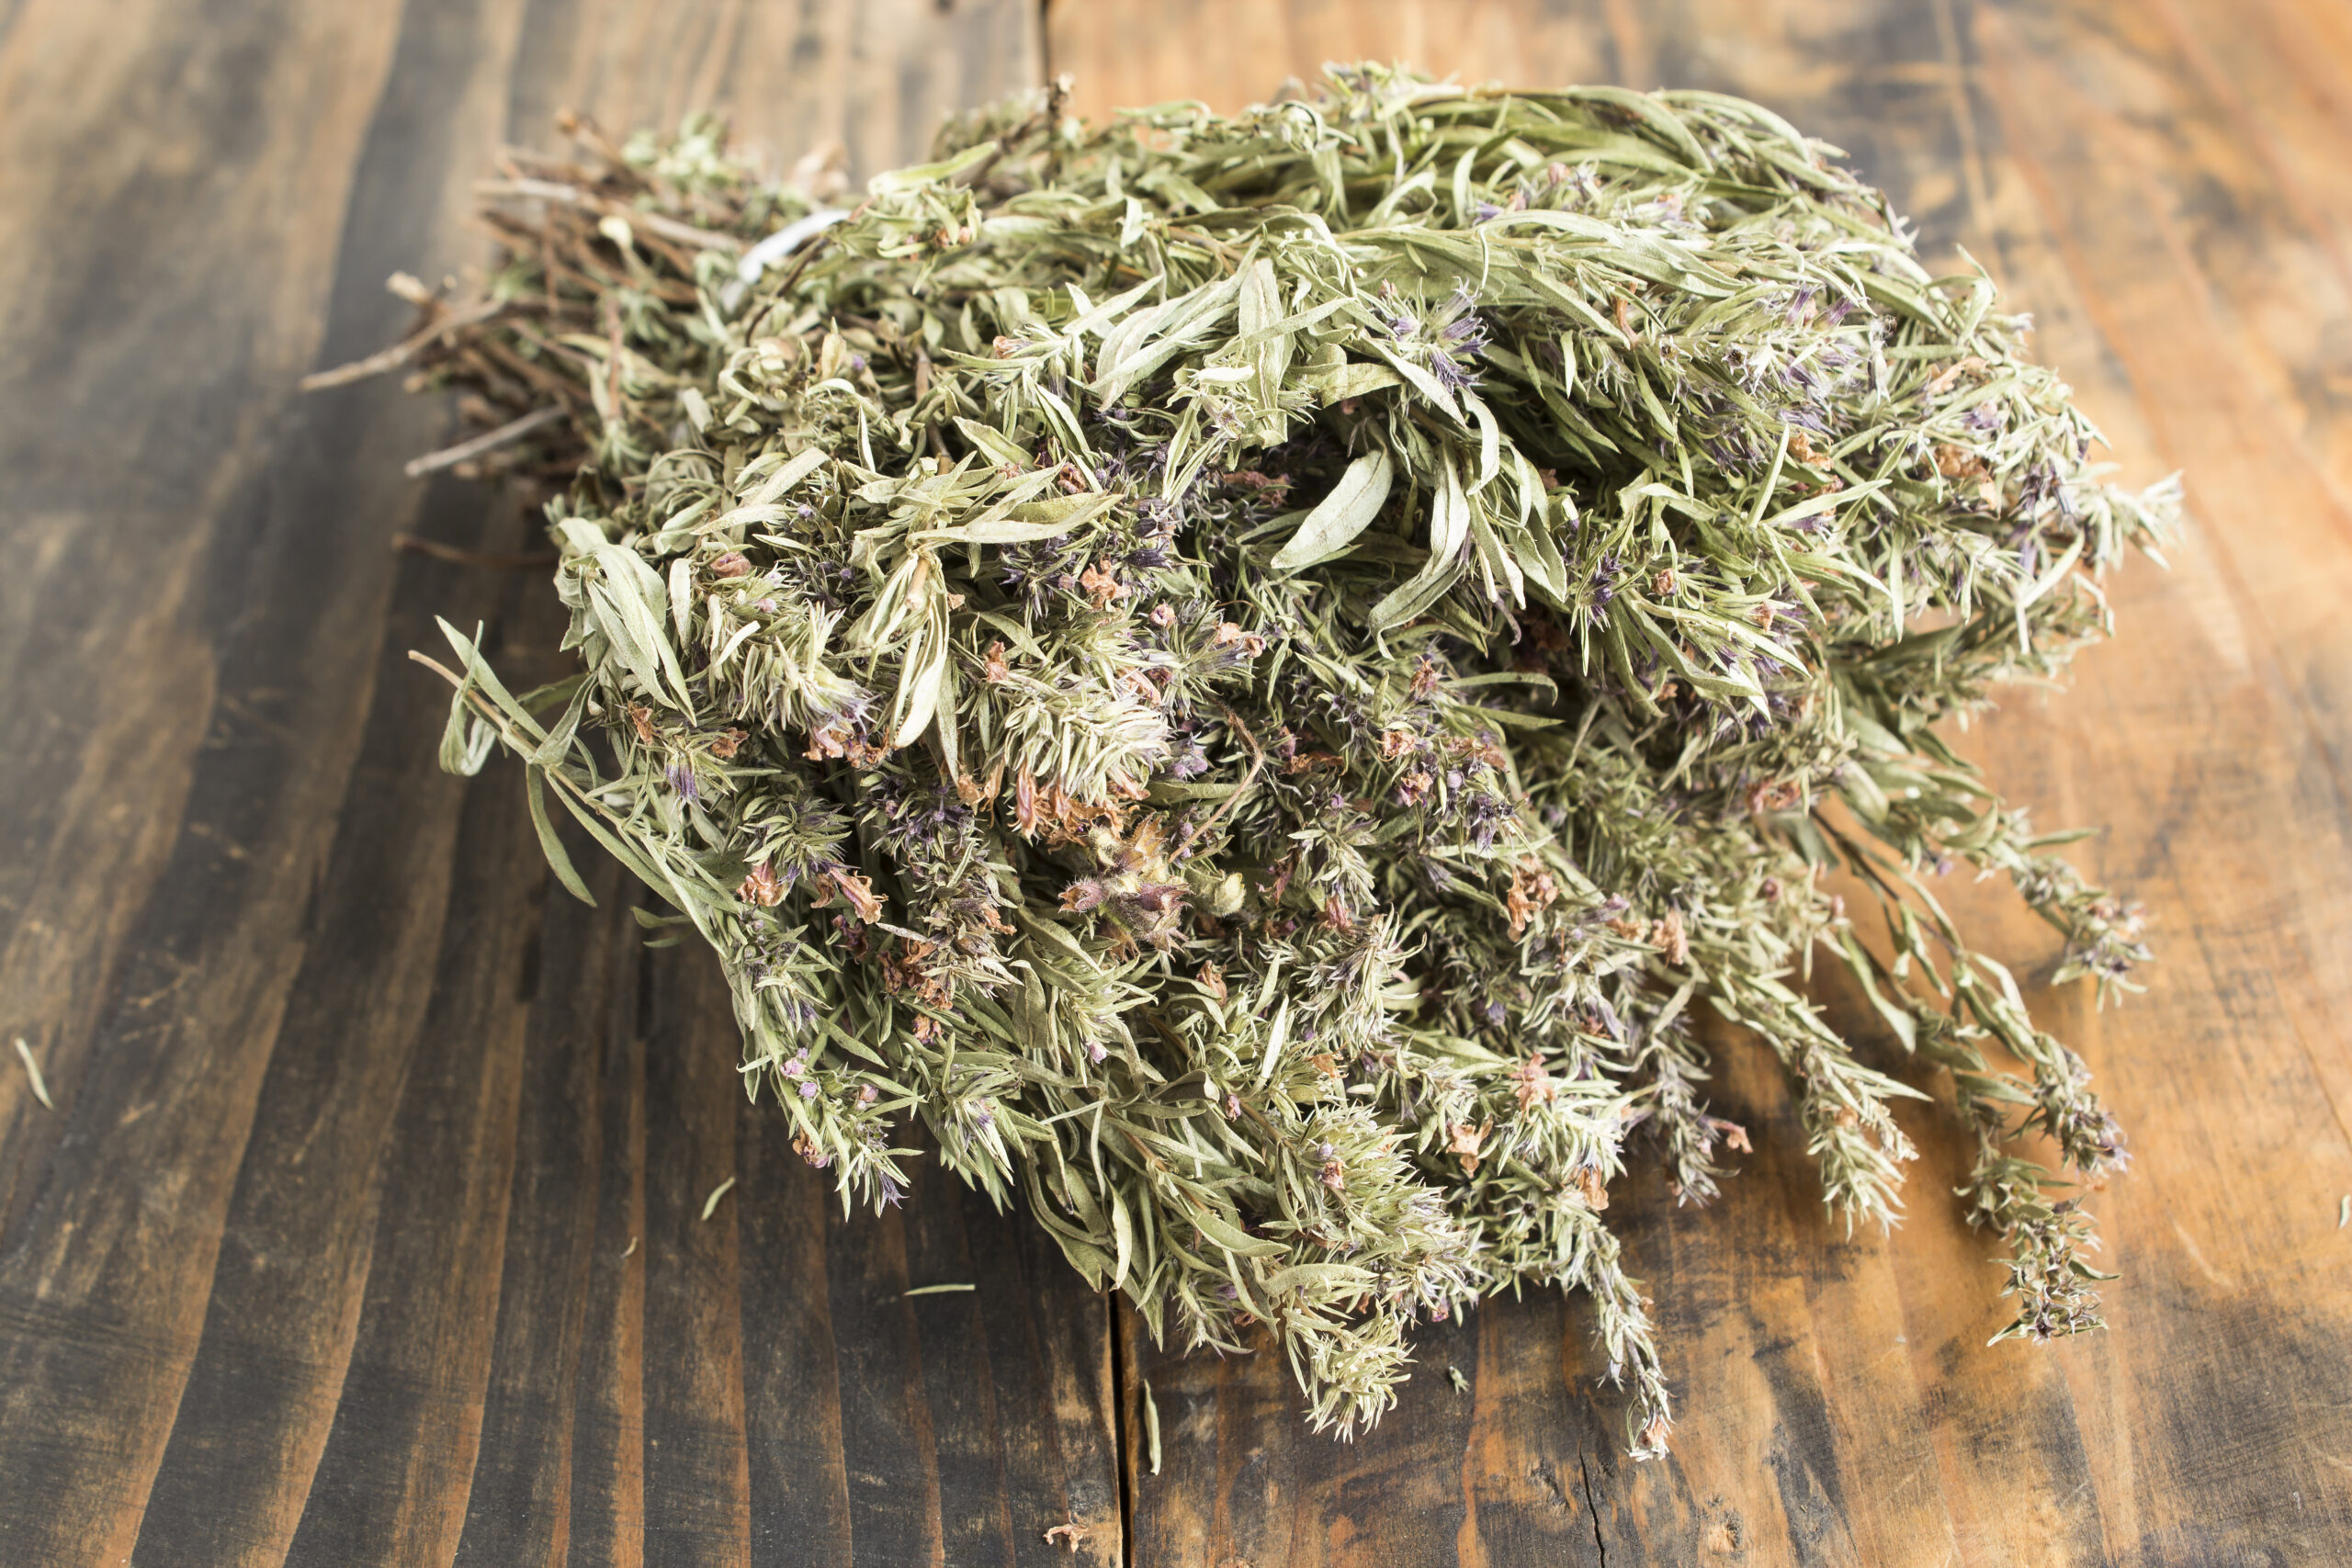 The Ultimate Guide To Smokable Hemp Flower And The Top Strains